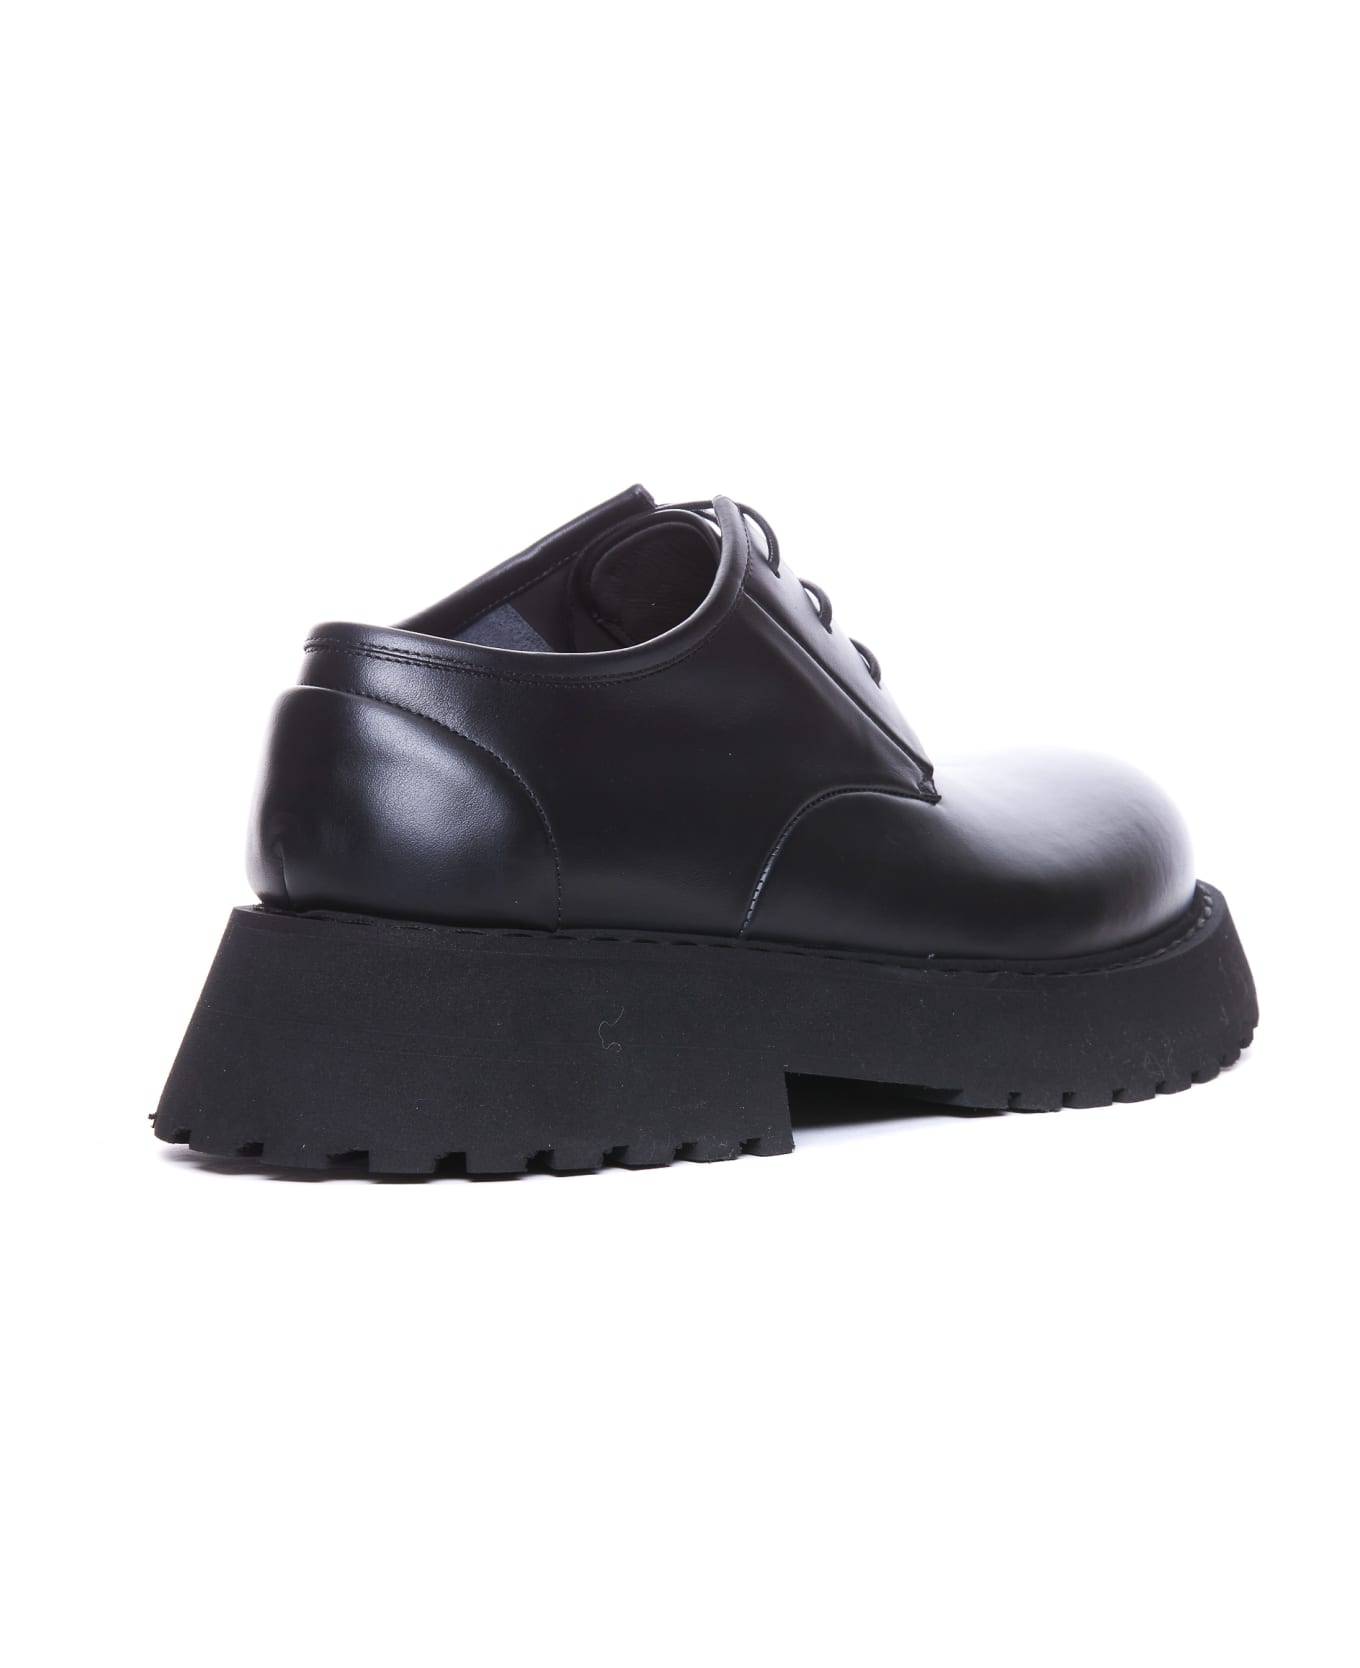 Marsell Micarro Derby Laced Up Shoes - Black ローファー＆デッキシューズ